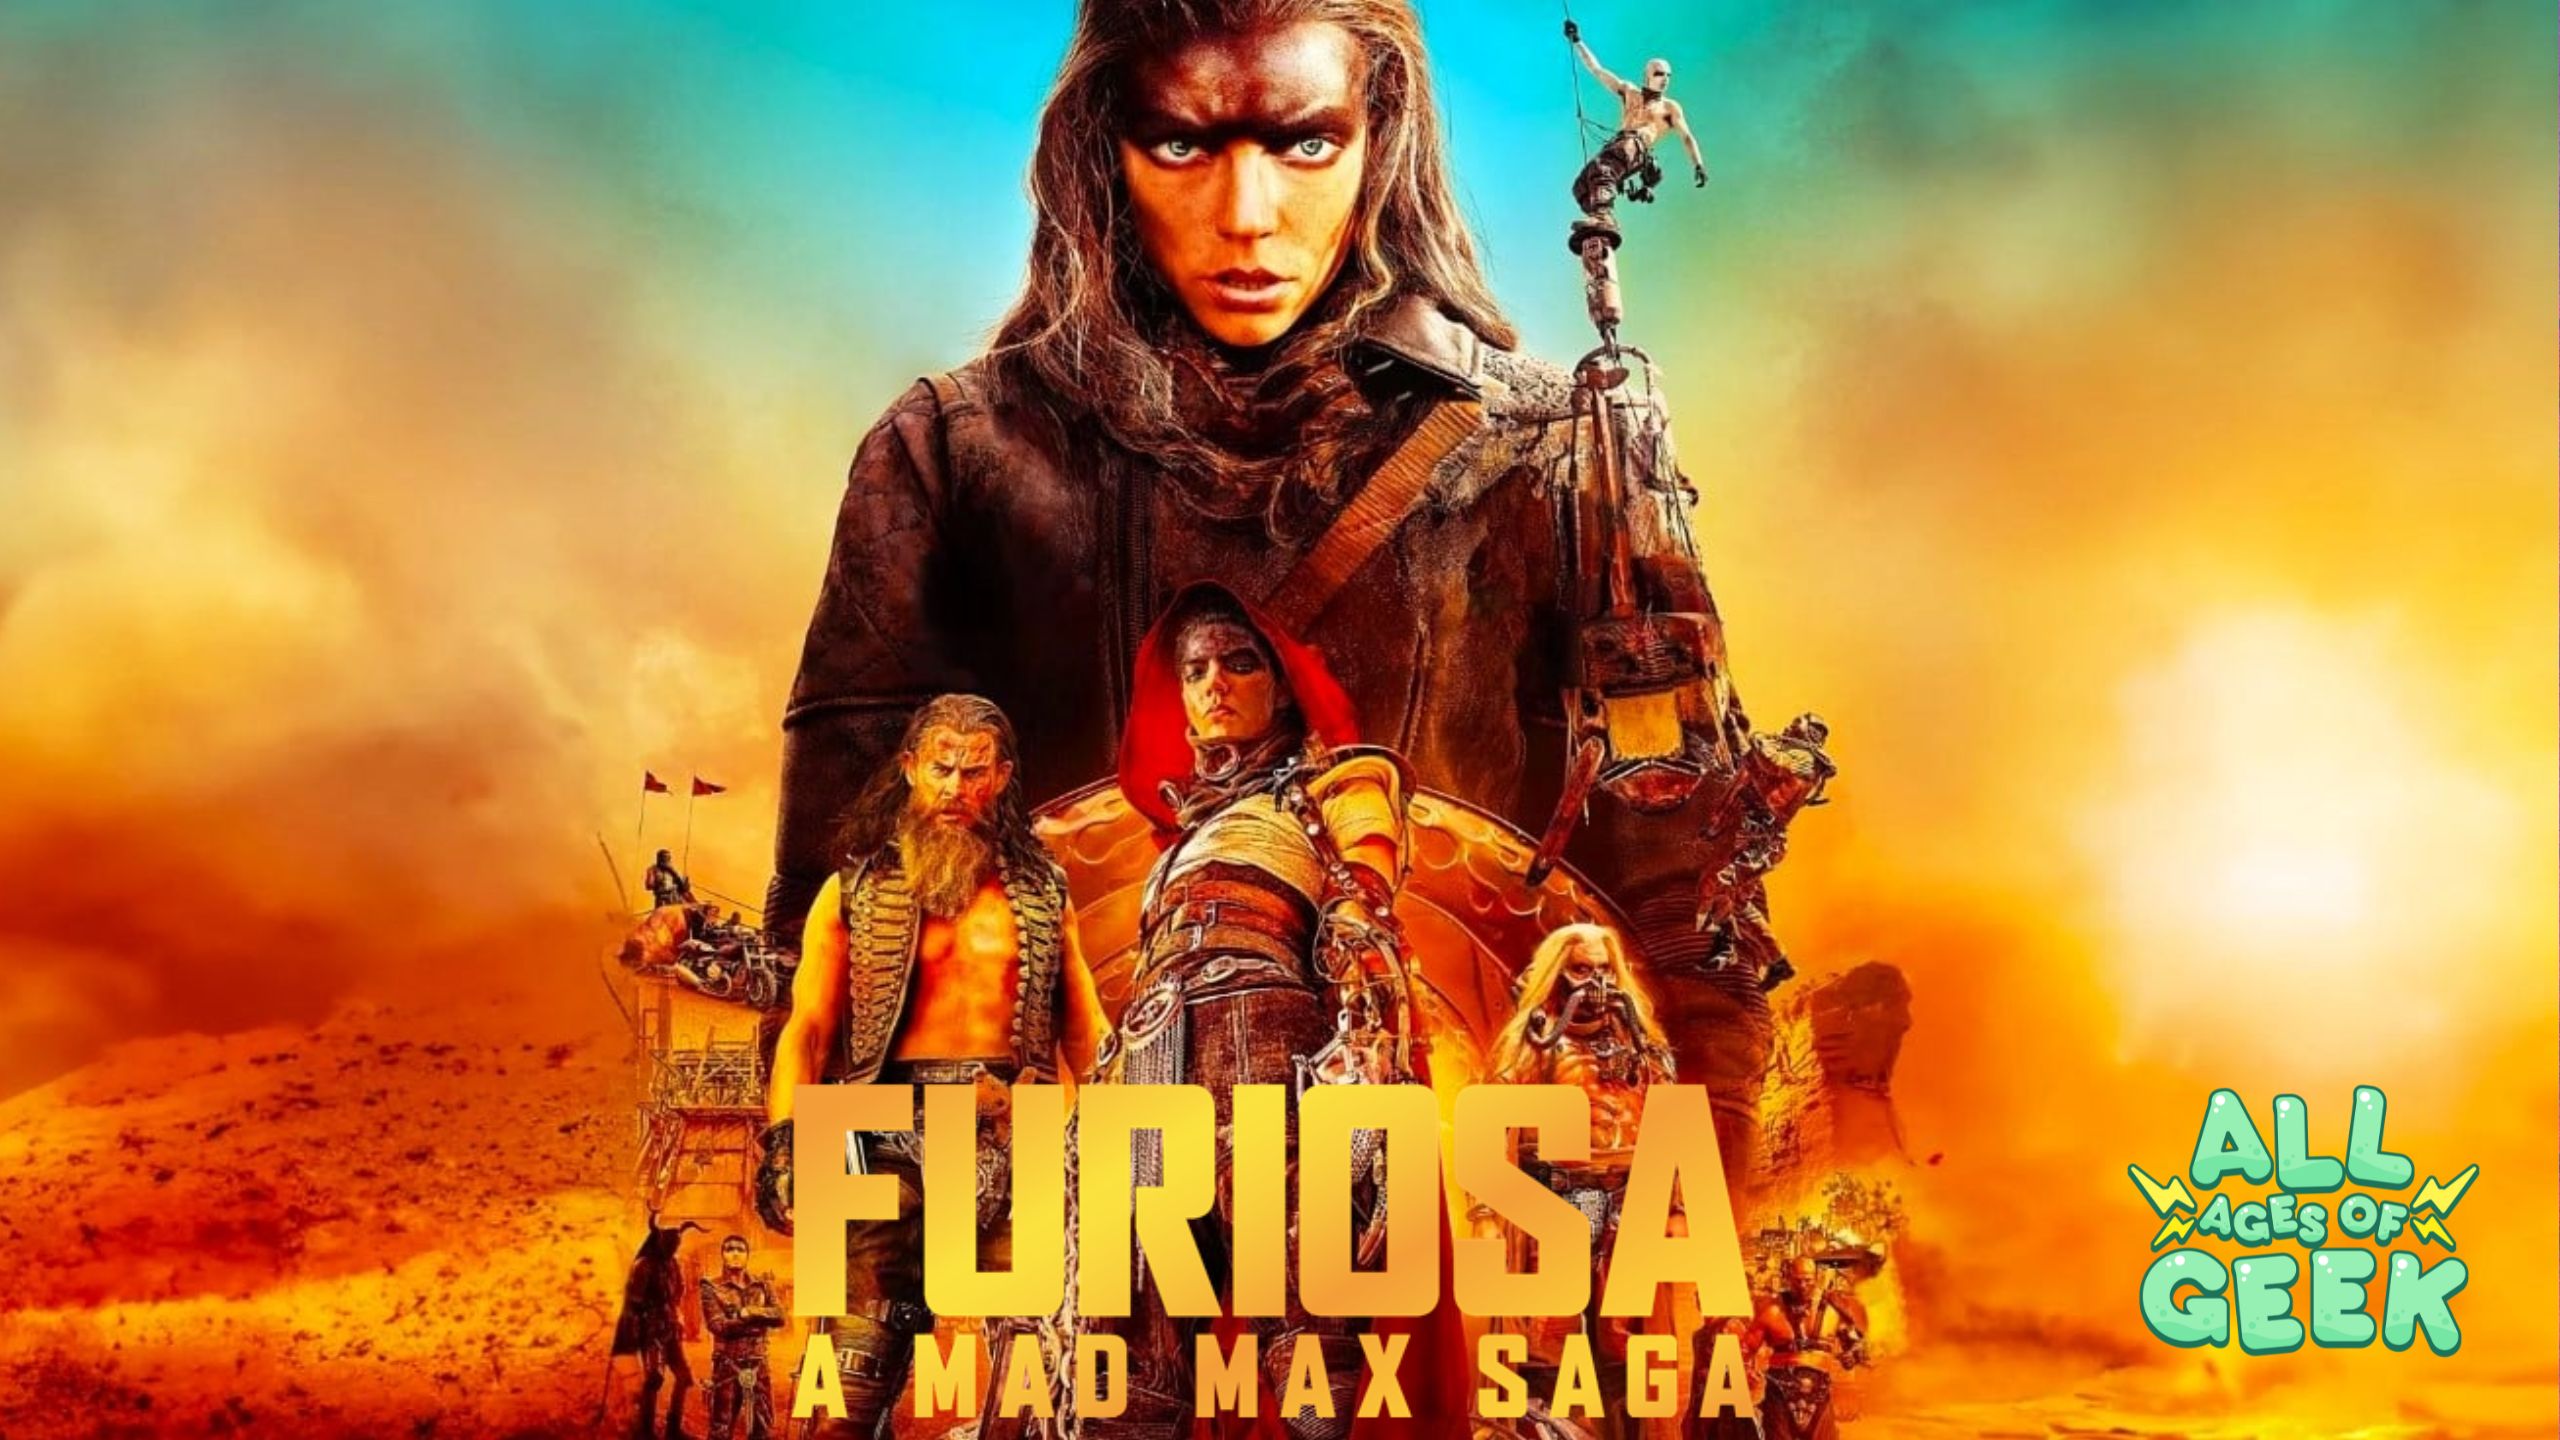 "Furiosa: A Mad Max Saga" movie poster featuring a fierce central character surrounded by other post-apocalyptic figures in a desert setting, with the All Ages of Geek logo in the corner.